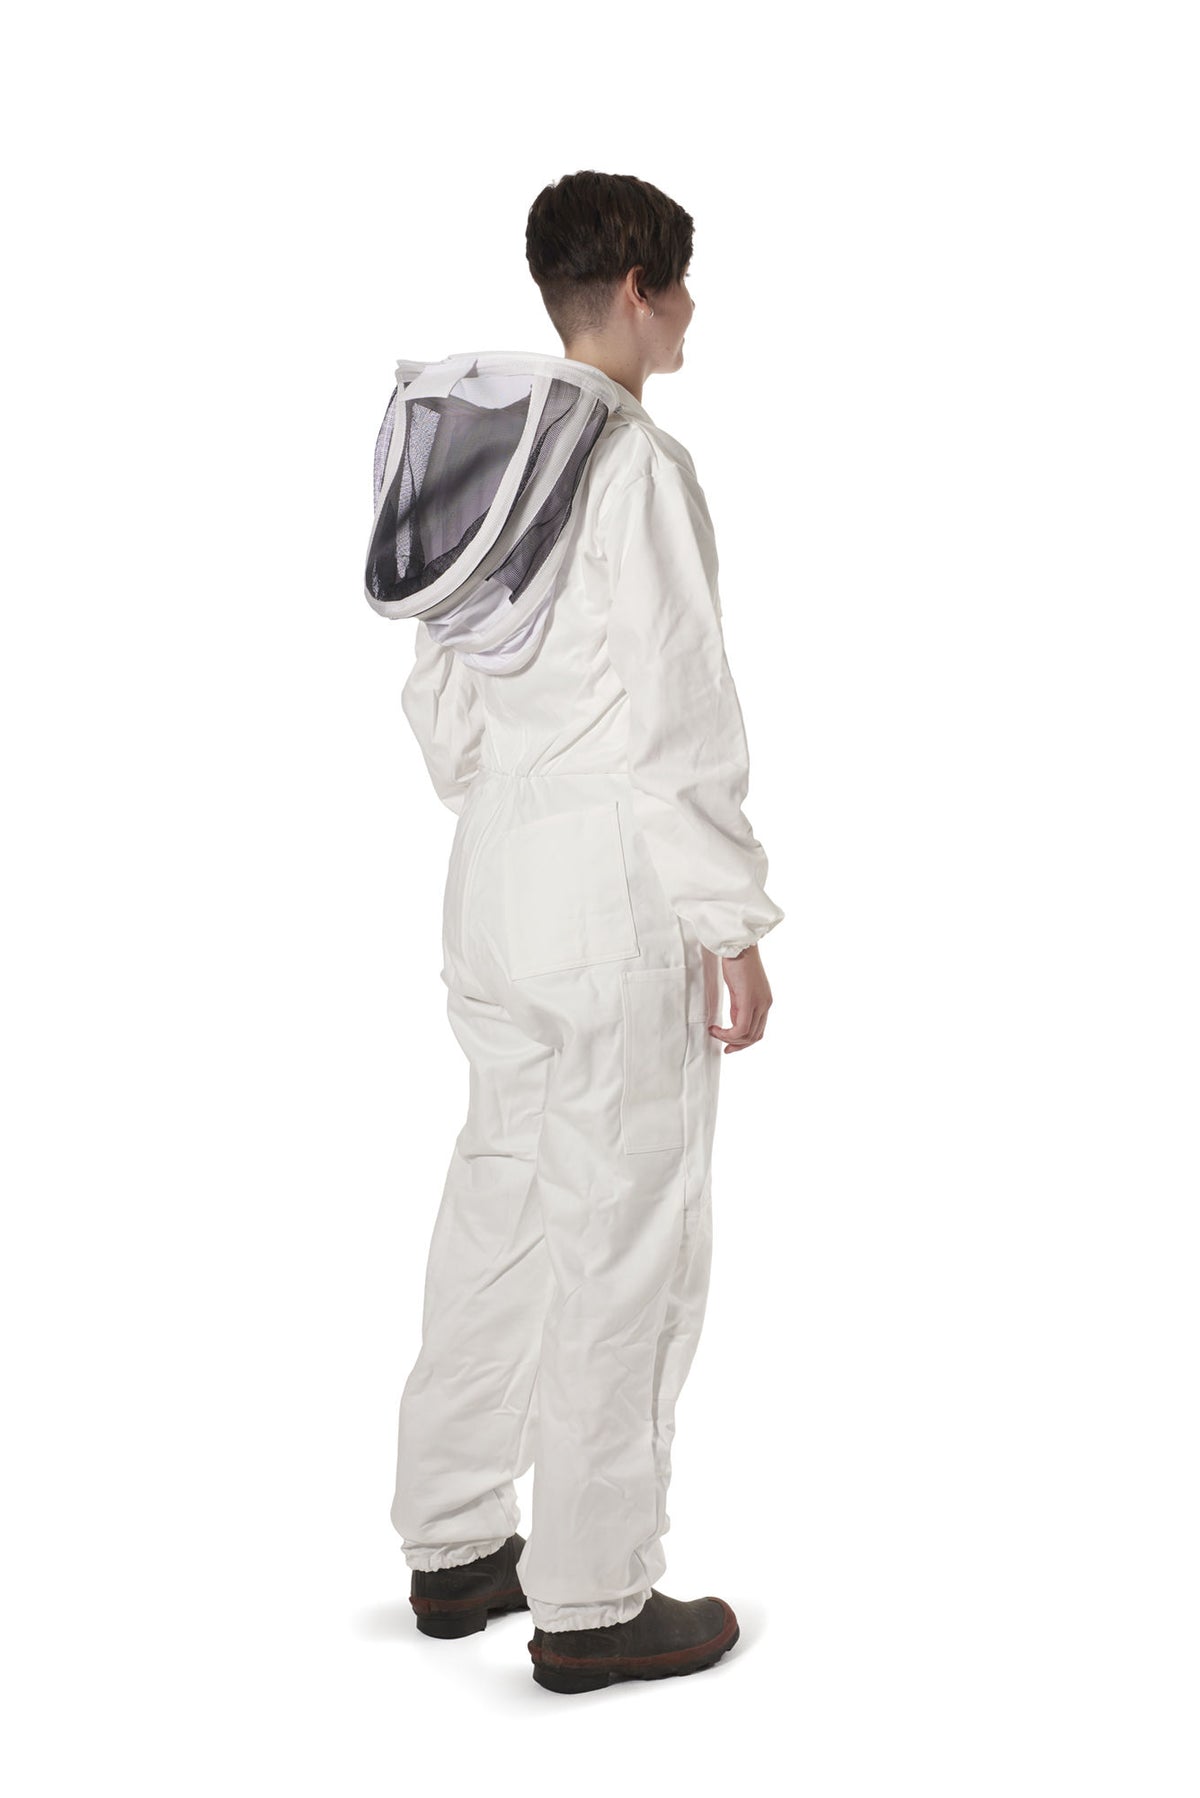 Women&#39;s Bee Suit with Folding Hood (White) - NZ made